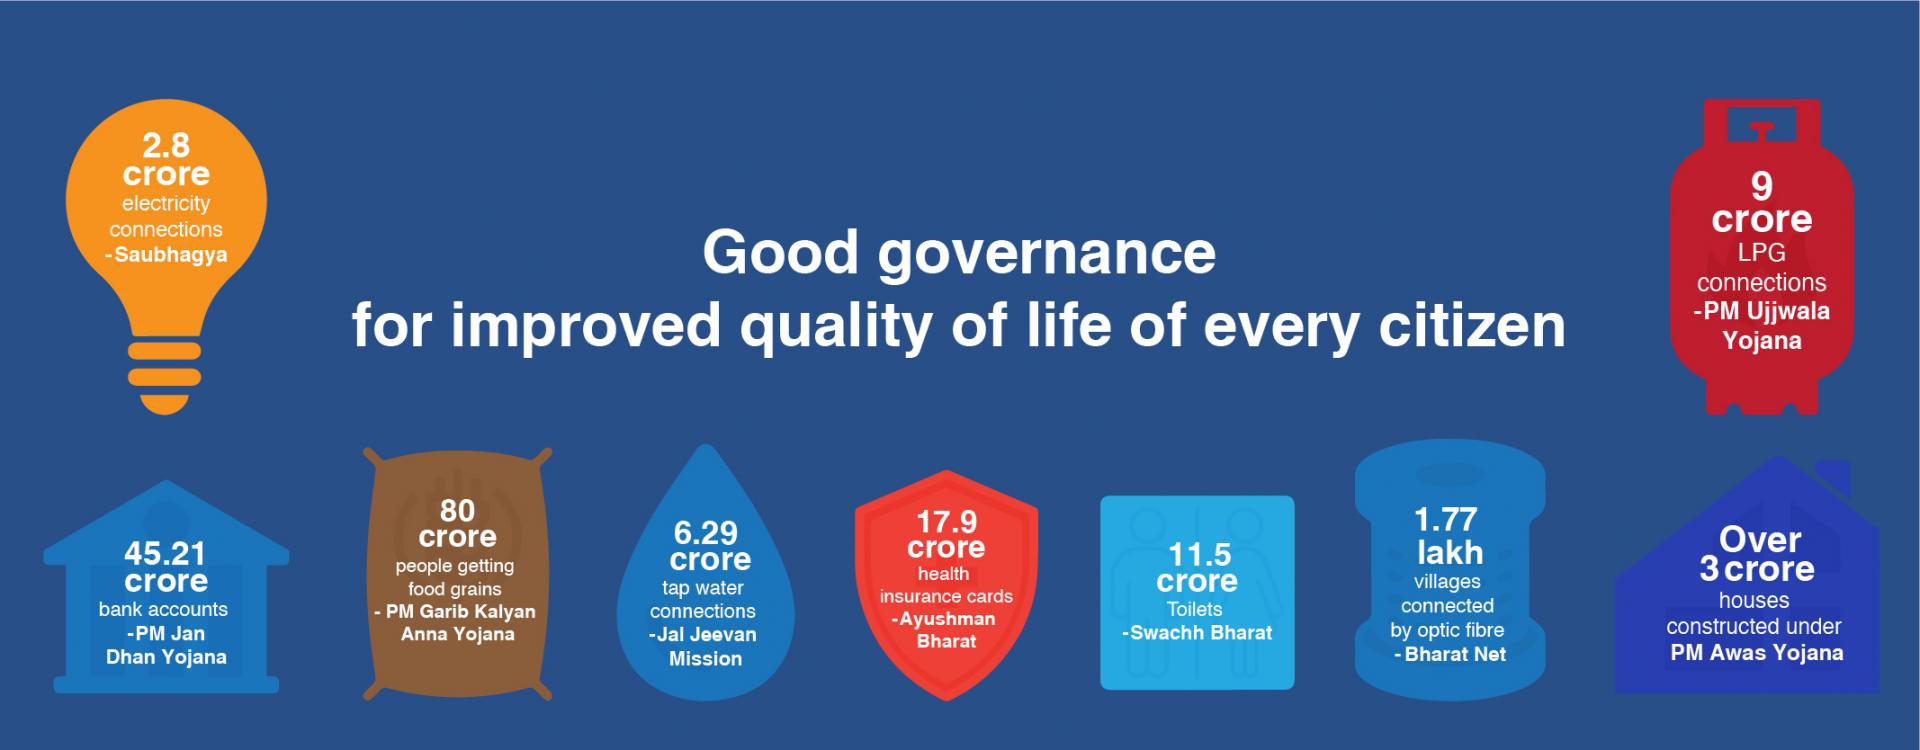 Good governance for improved quality of life of every citizen